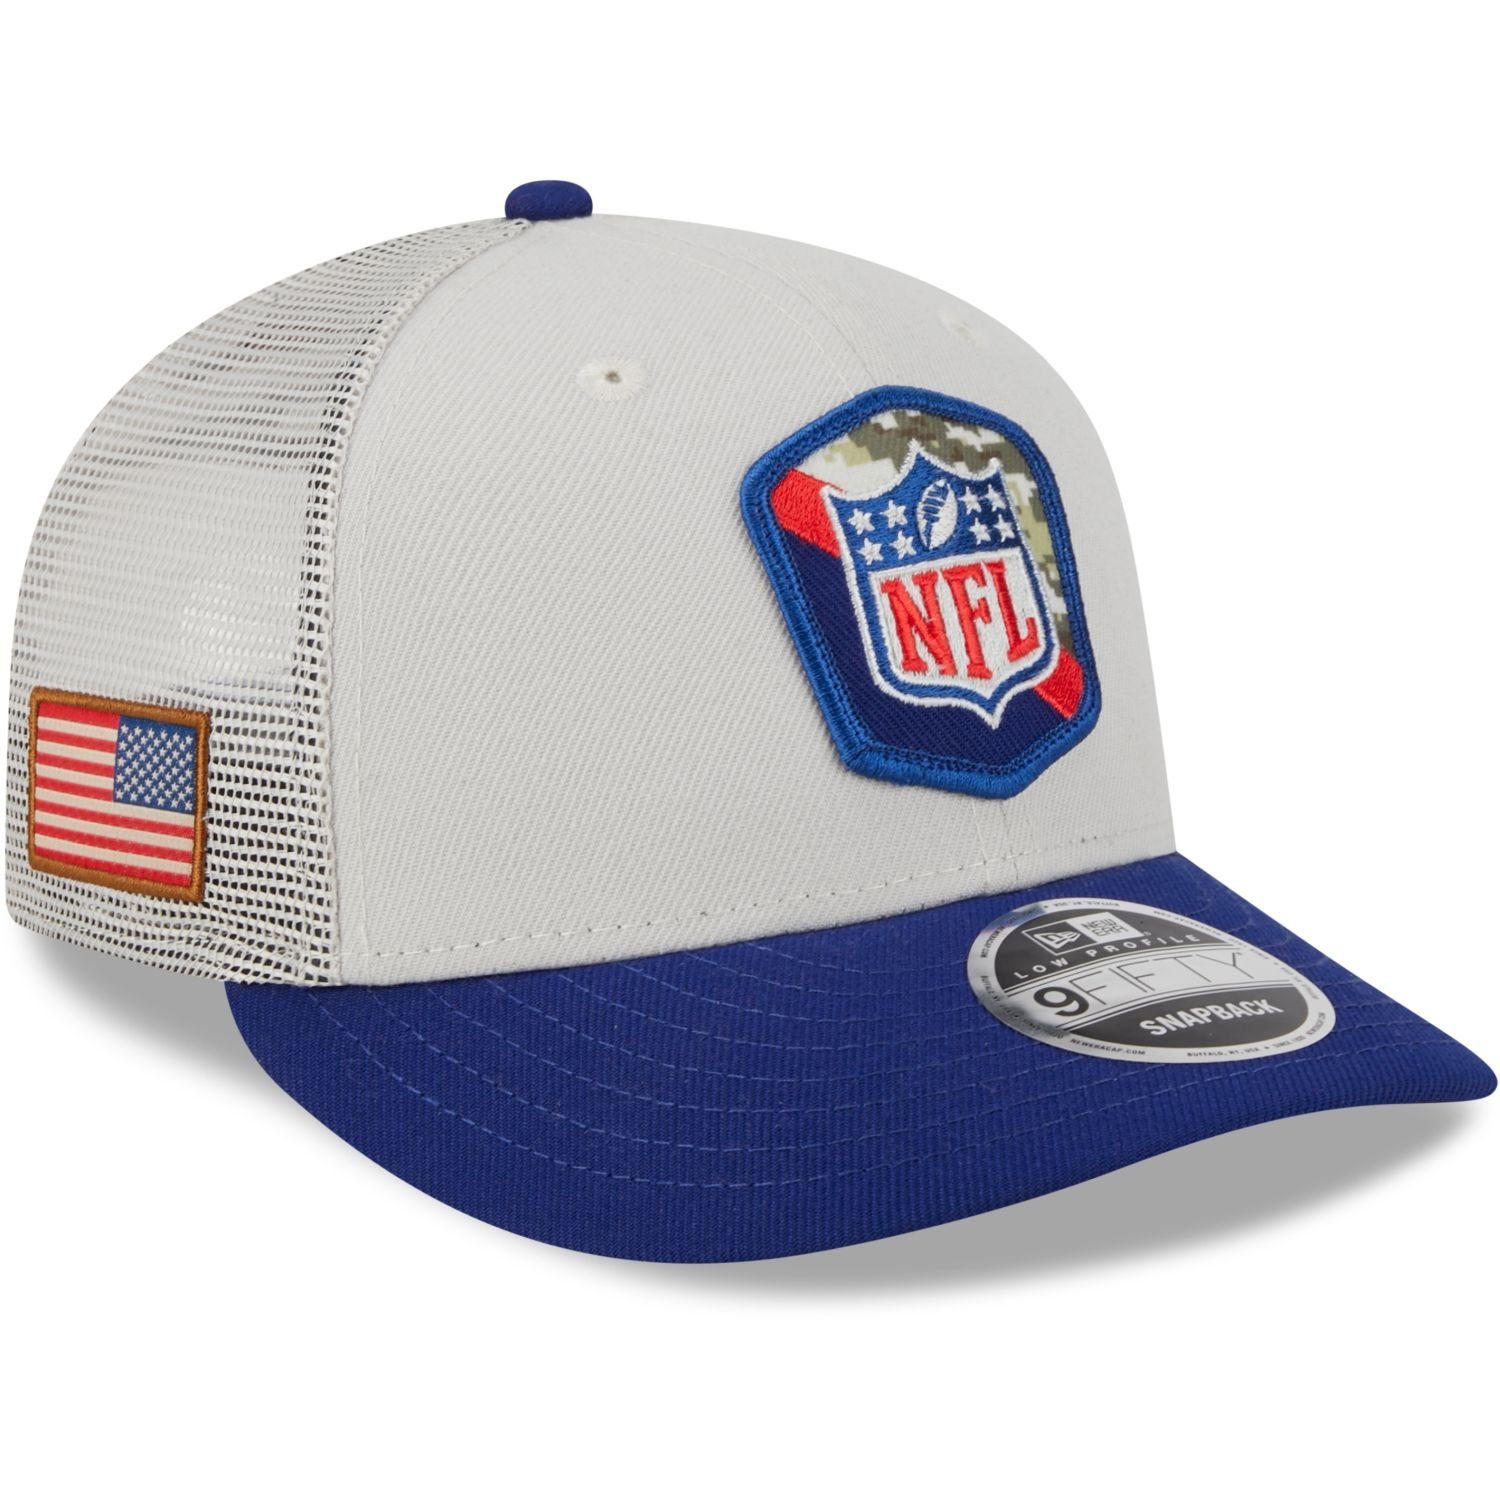 New Era Snapback Cap 9Fifty Low Profile Snap NFL Salute to Service NFL SHIELD